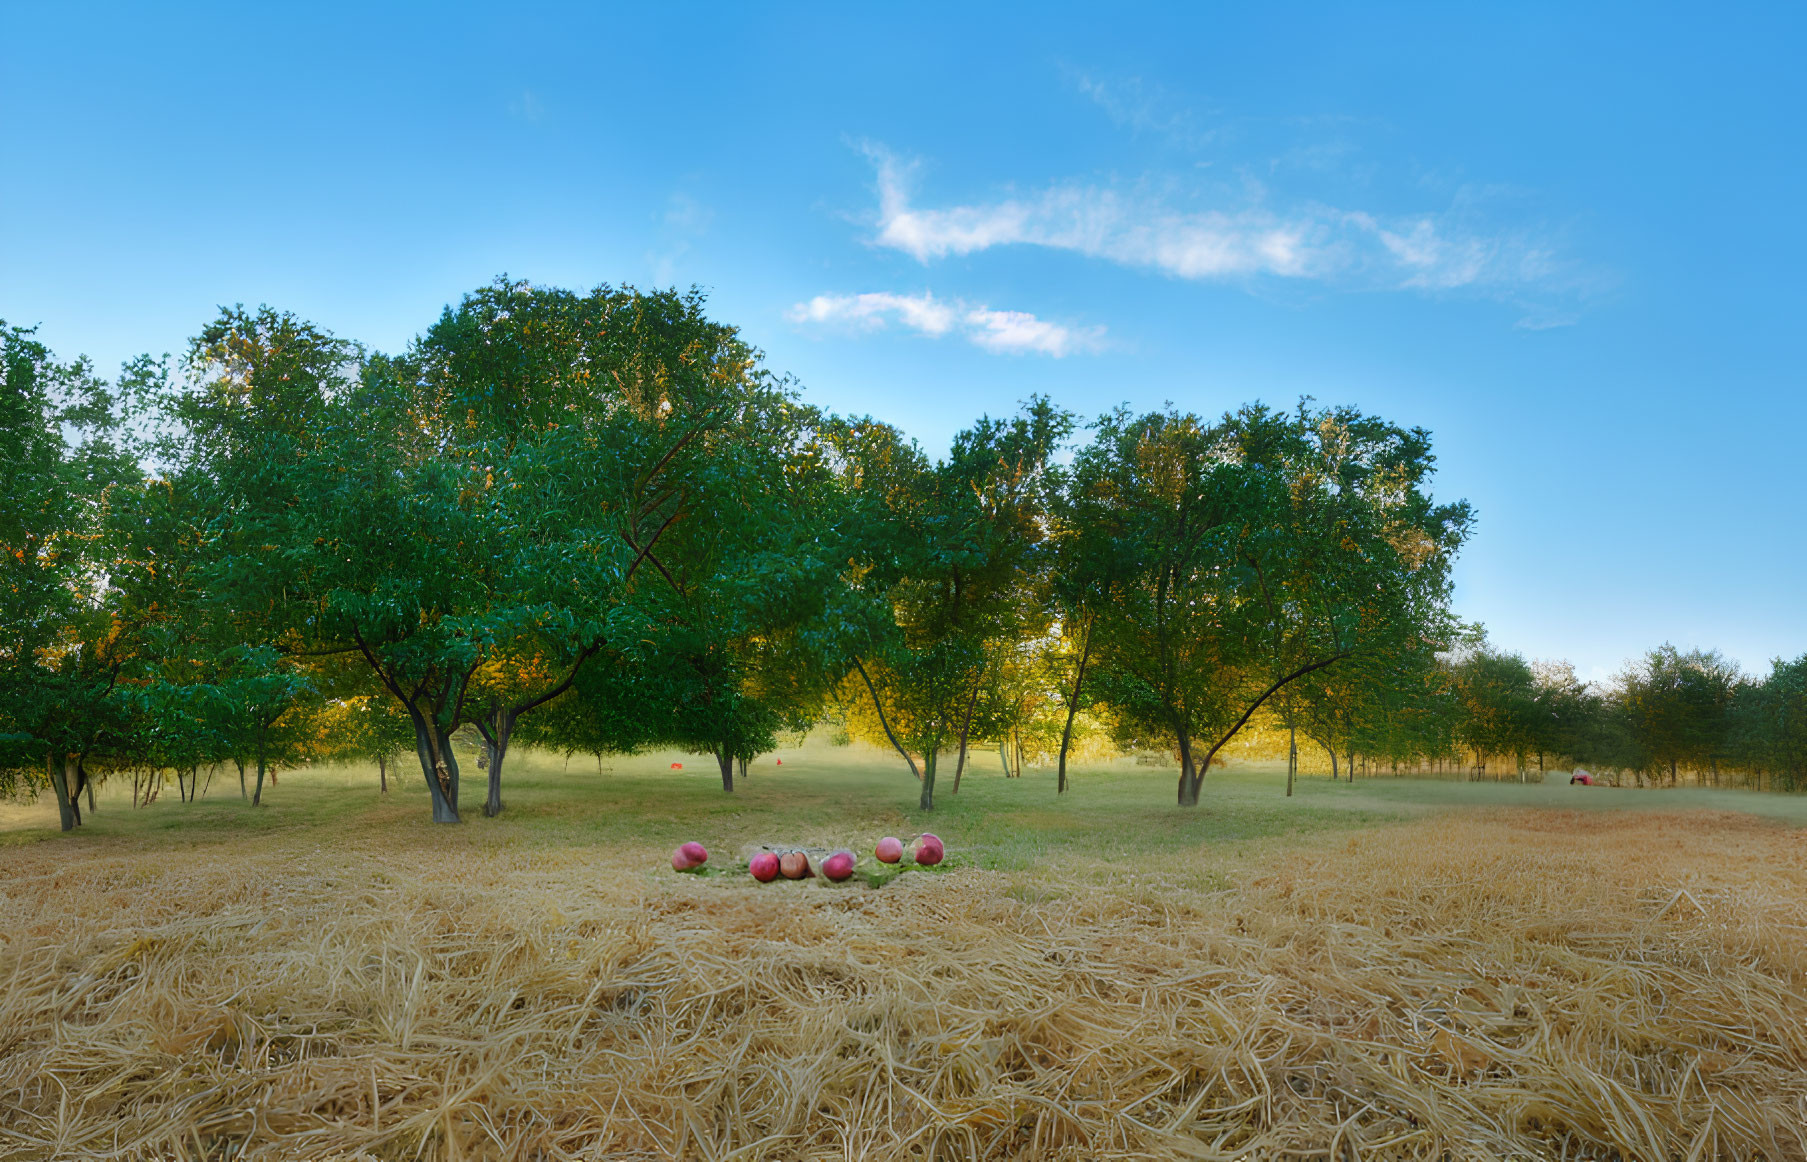 Tranquil orchard with ripe apples, hay, and clear sky at sunrise or sunset